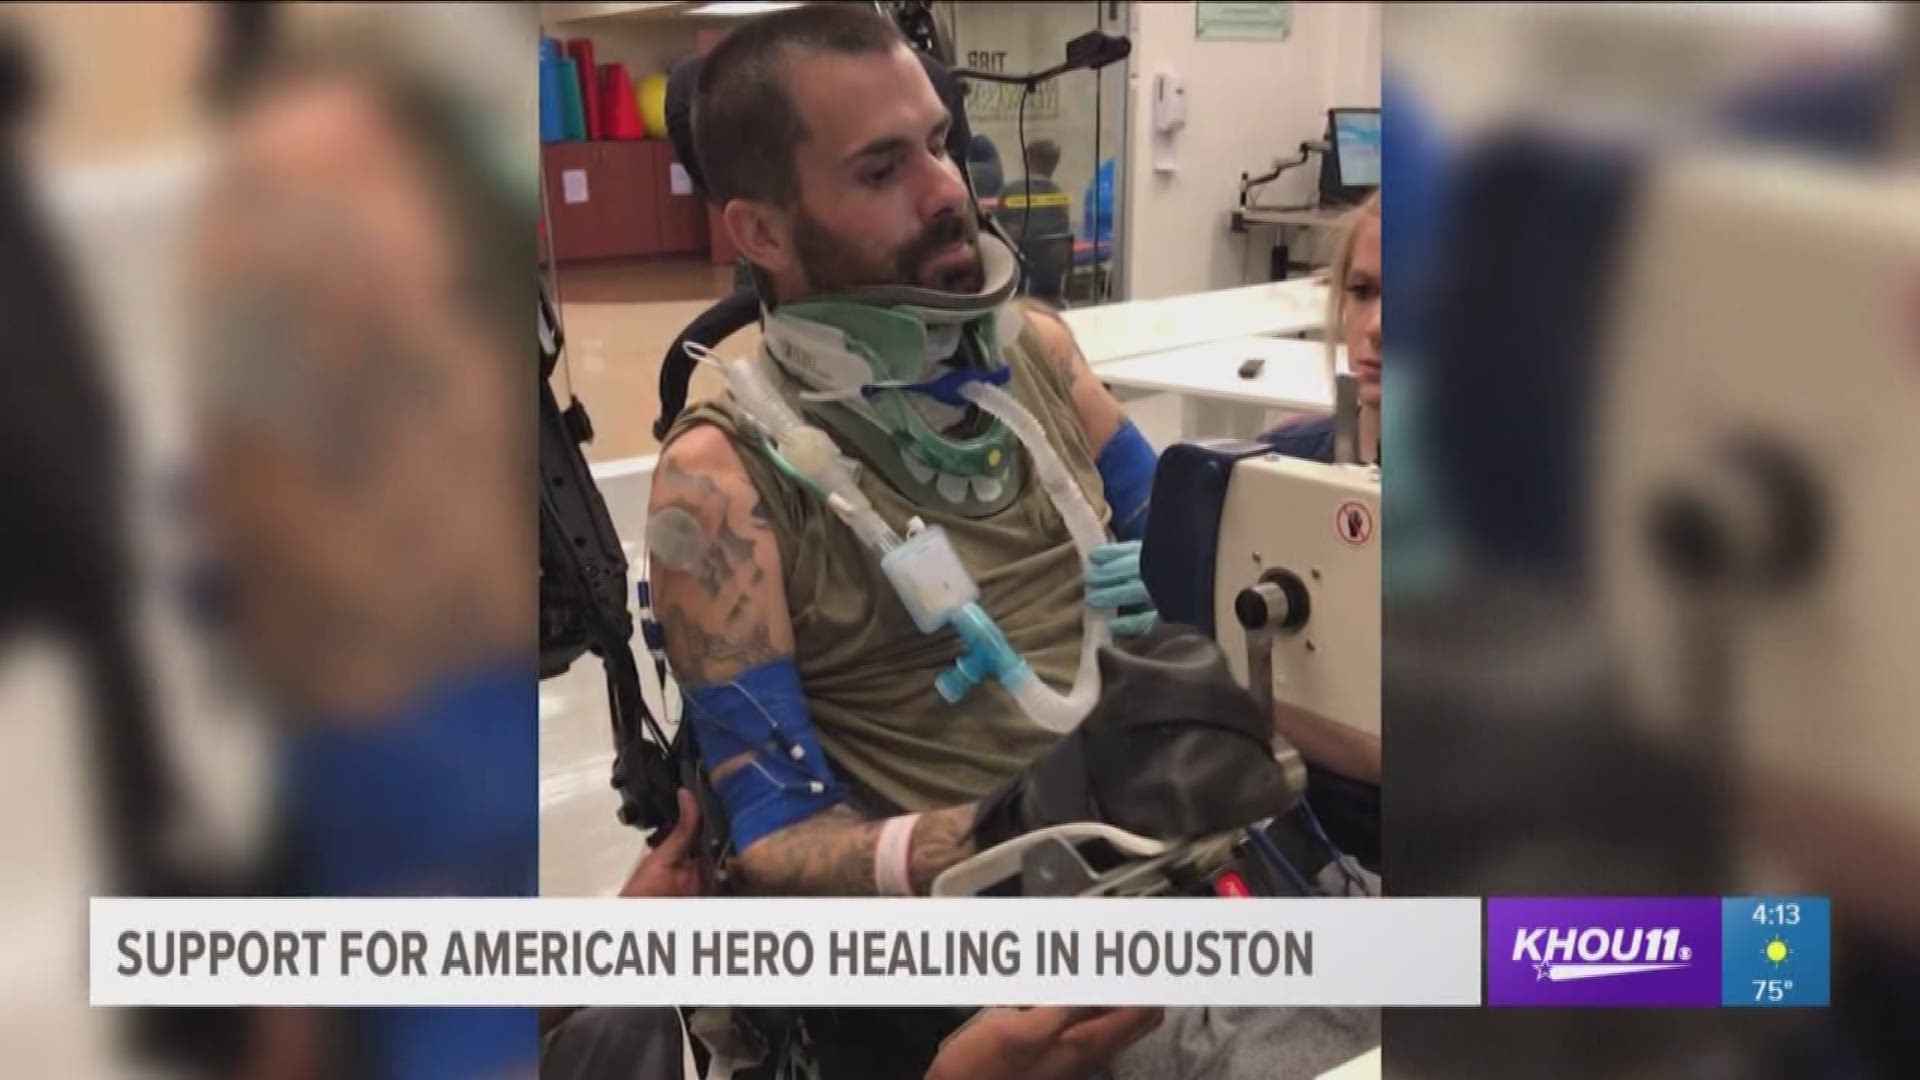 The man is an American hero. He nearly lost his life when he was clearing explosives from a hospital in Syria. Now, he's recovering here in Houston. 